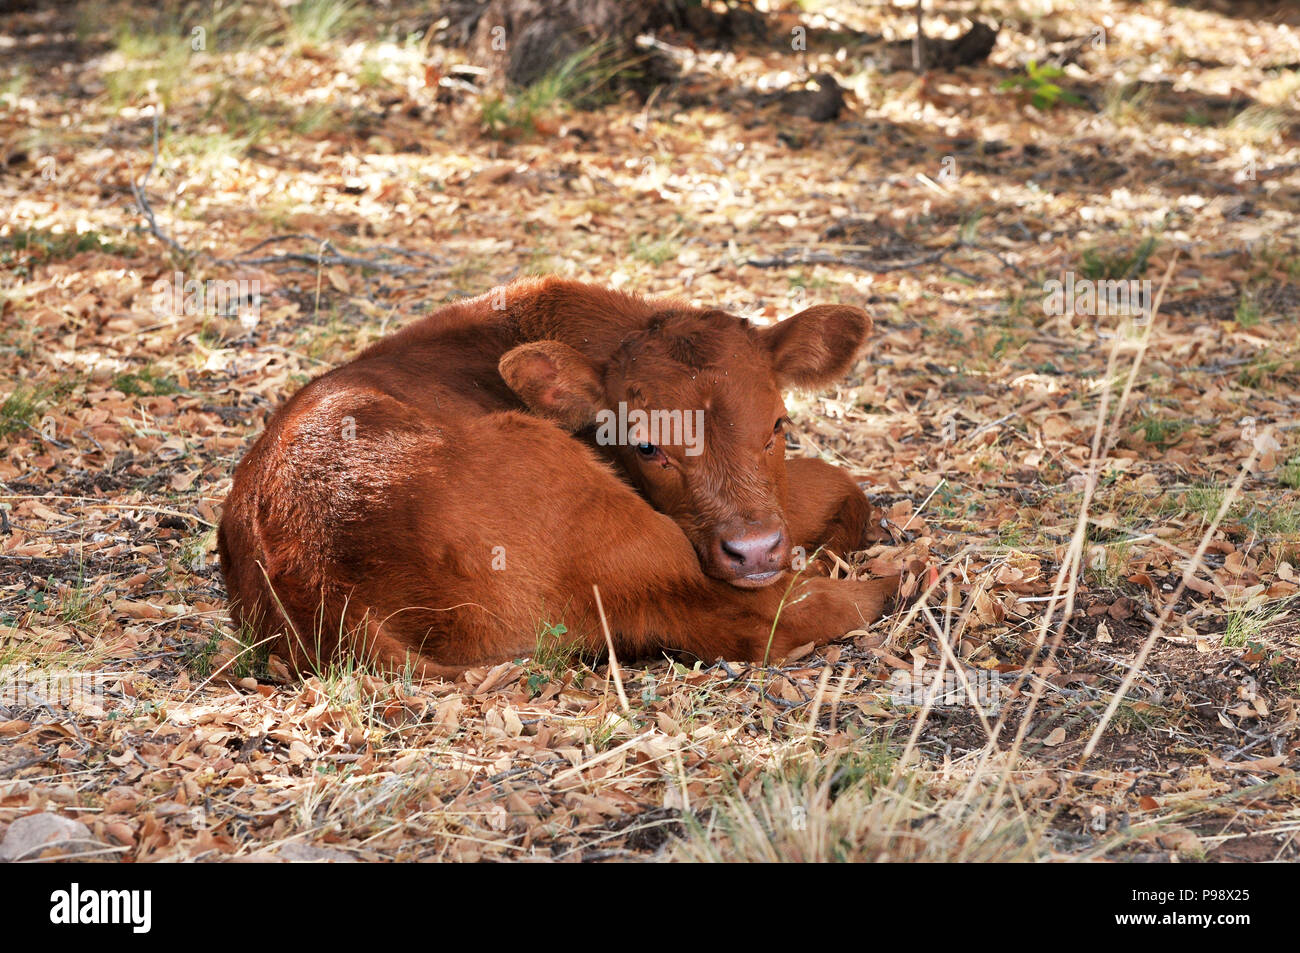 A calf that is part of a herd of range cattle sits under a tree in the foothills of the Santa Rita Mountains of the Coronado National Forest in the So Stock Photo